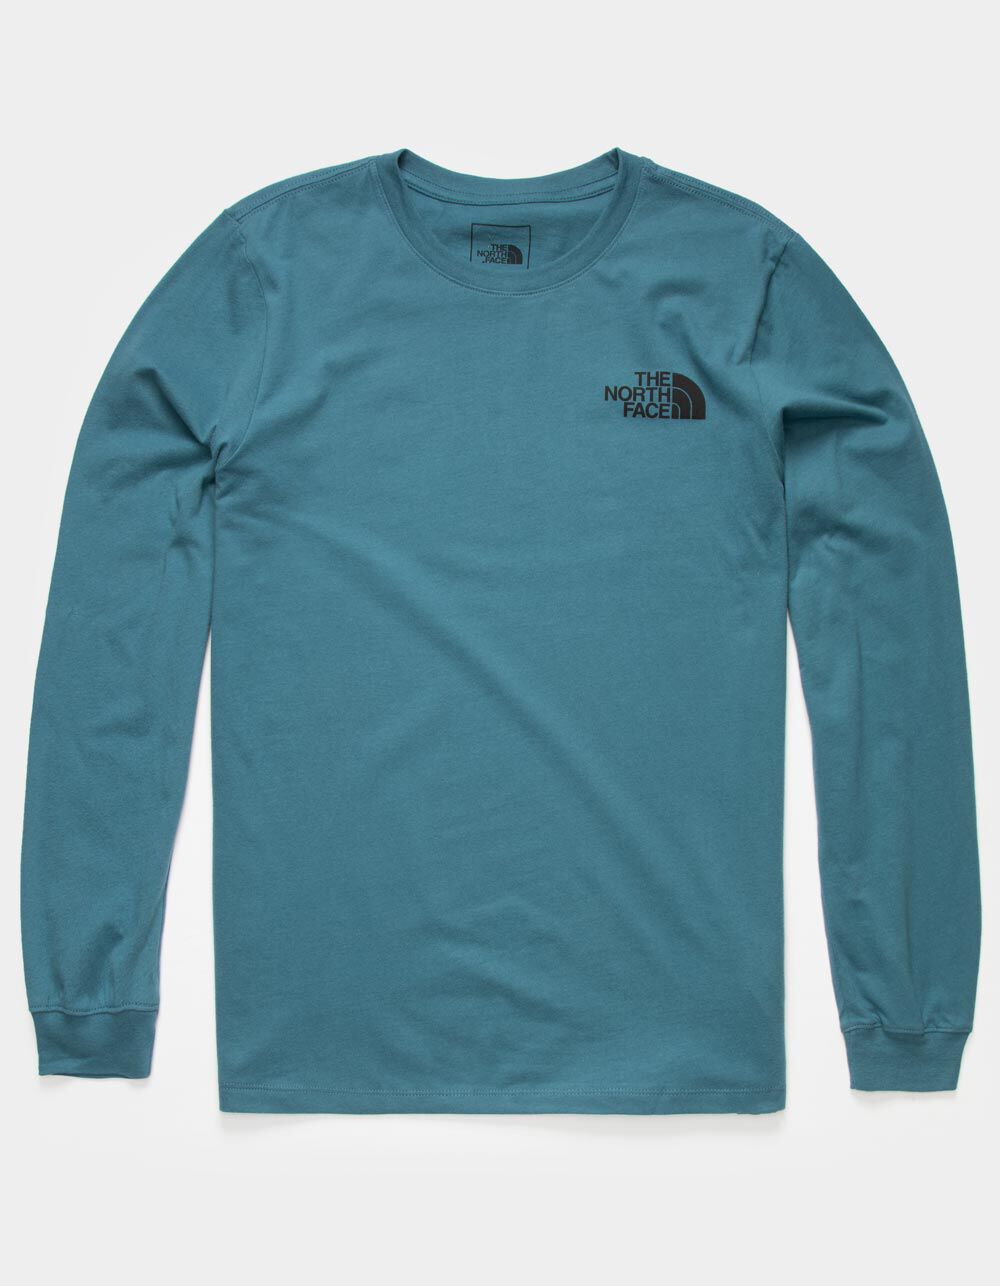 THE NORTH FACE North South East Box Mens T-Shirt - DARK BLUE | Tillys